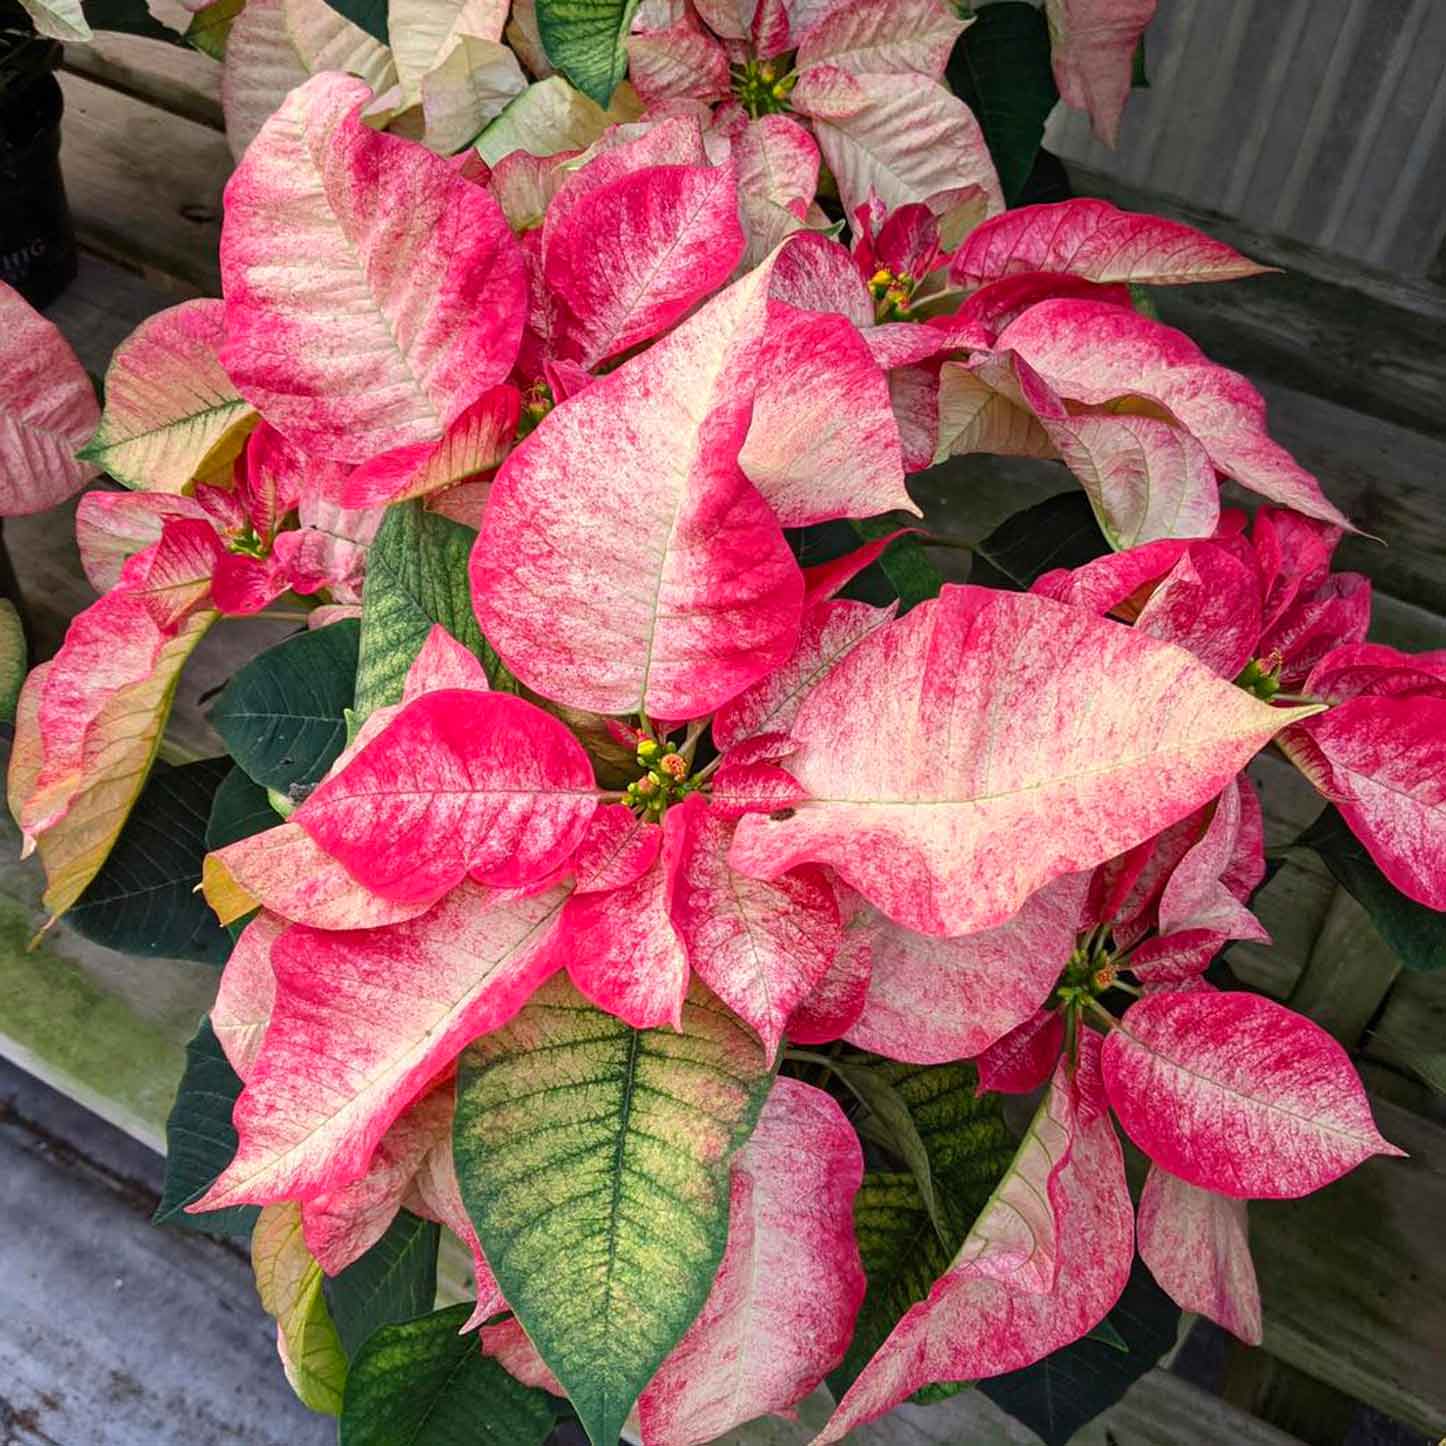 The Poinsettia – A Holiday Gem brought to U.S. by a South Carolinian